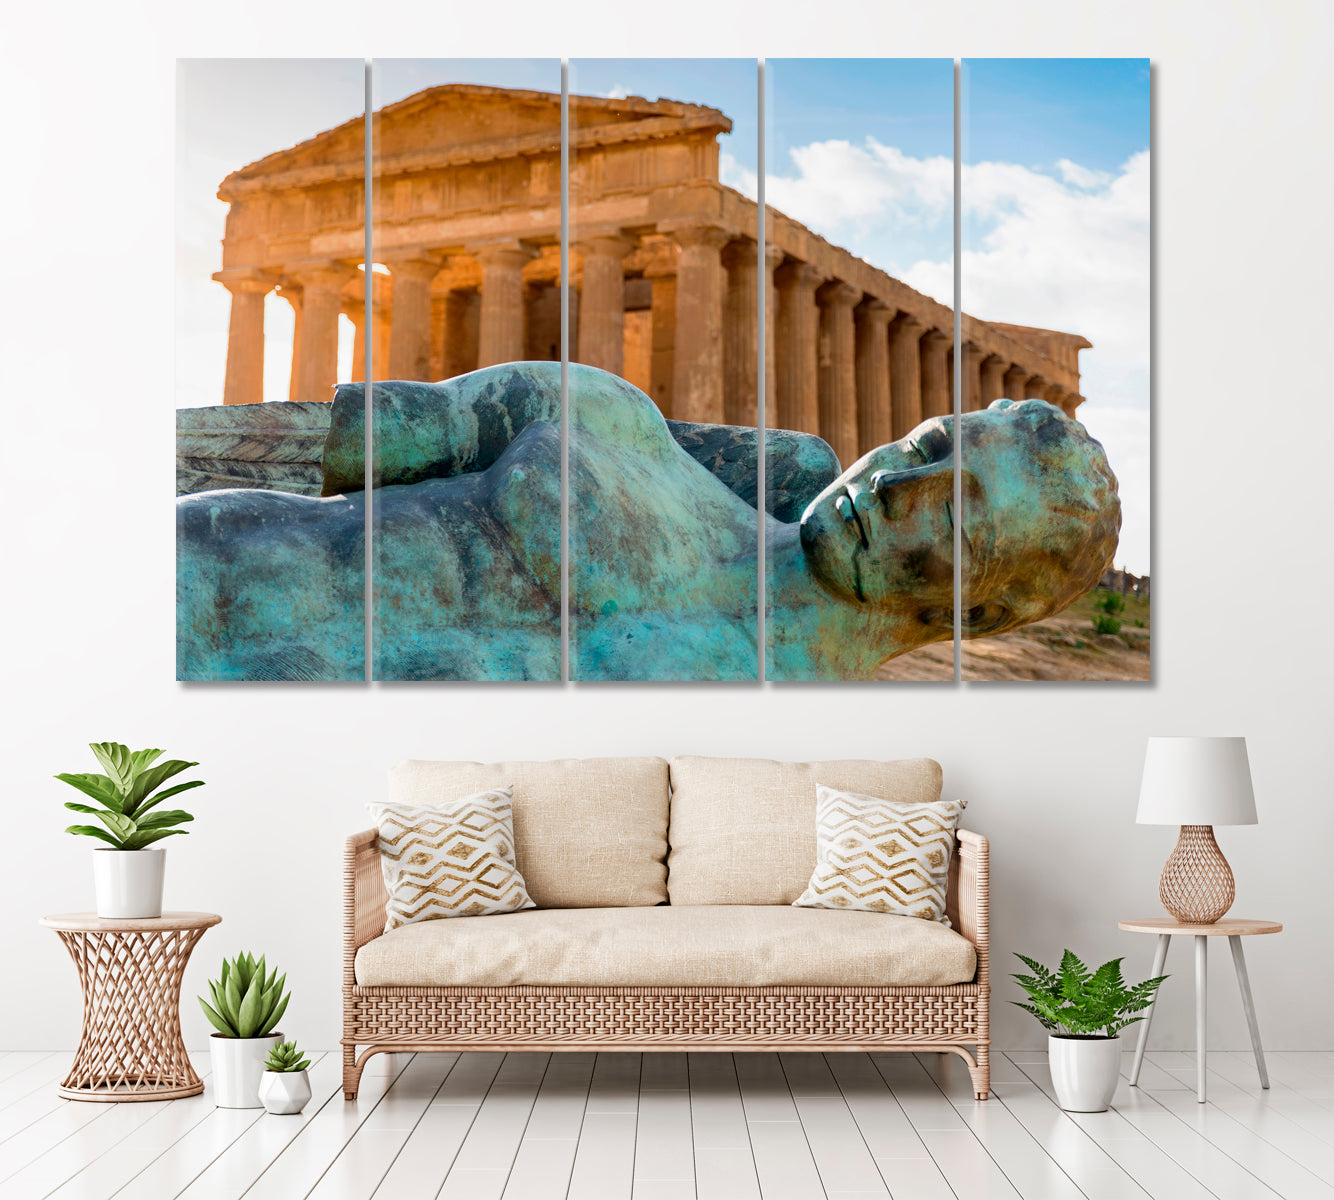 Temple of Concordia Agrigento Italy Canvas Print ArtLexy 5 Panels 36"x24" inches 